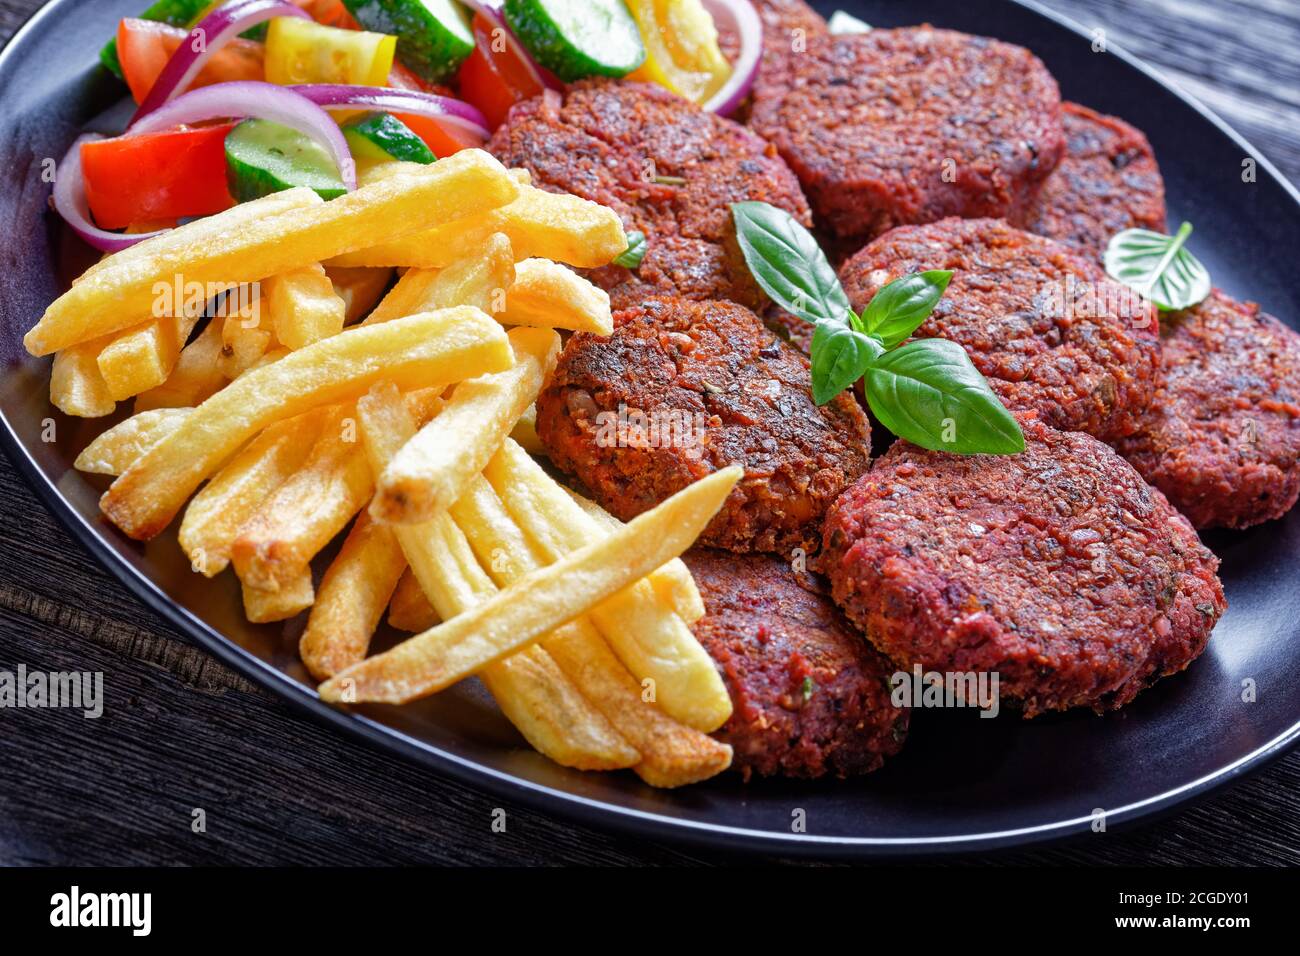 French fry, fresh salad of tomato cucumber and red onion with fresh basil served with beetroot patties of mushrooms and black beans on a black plate o Stock Photo